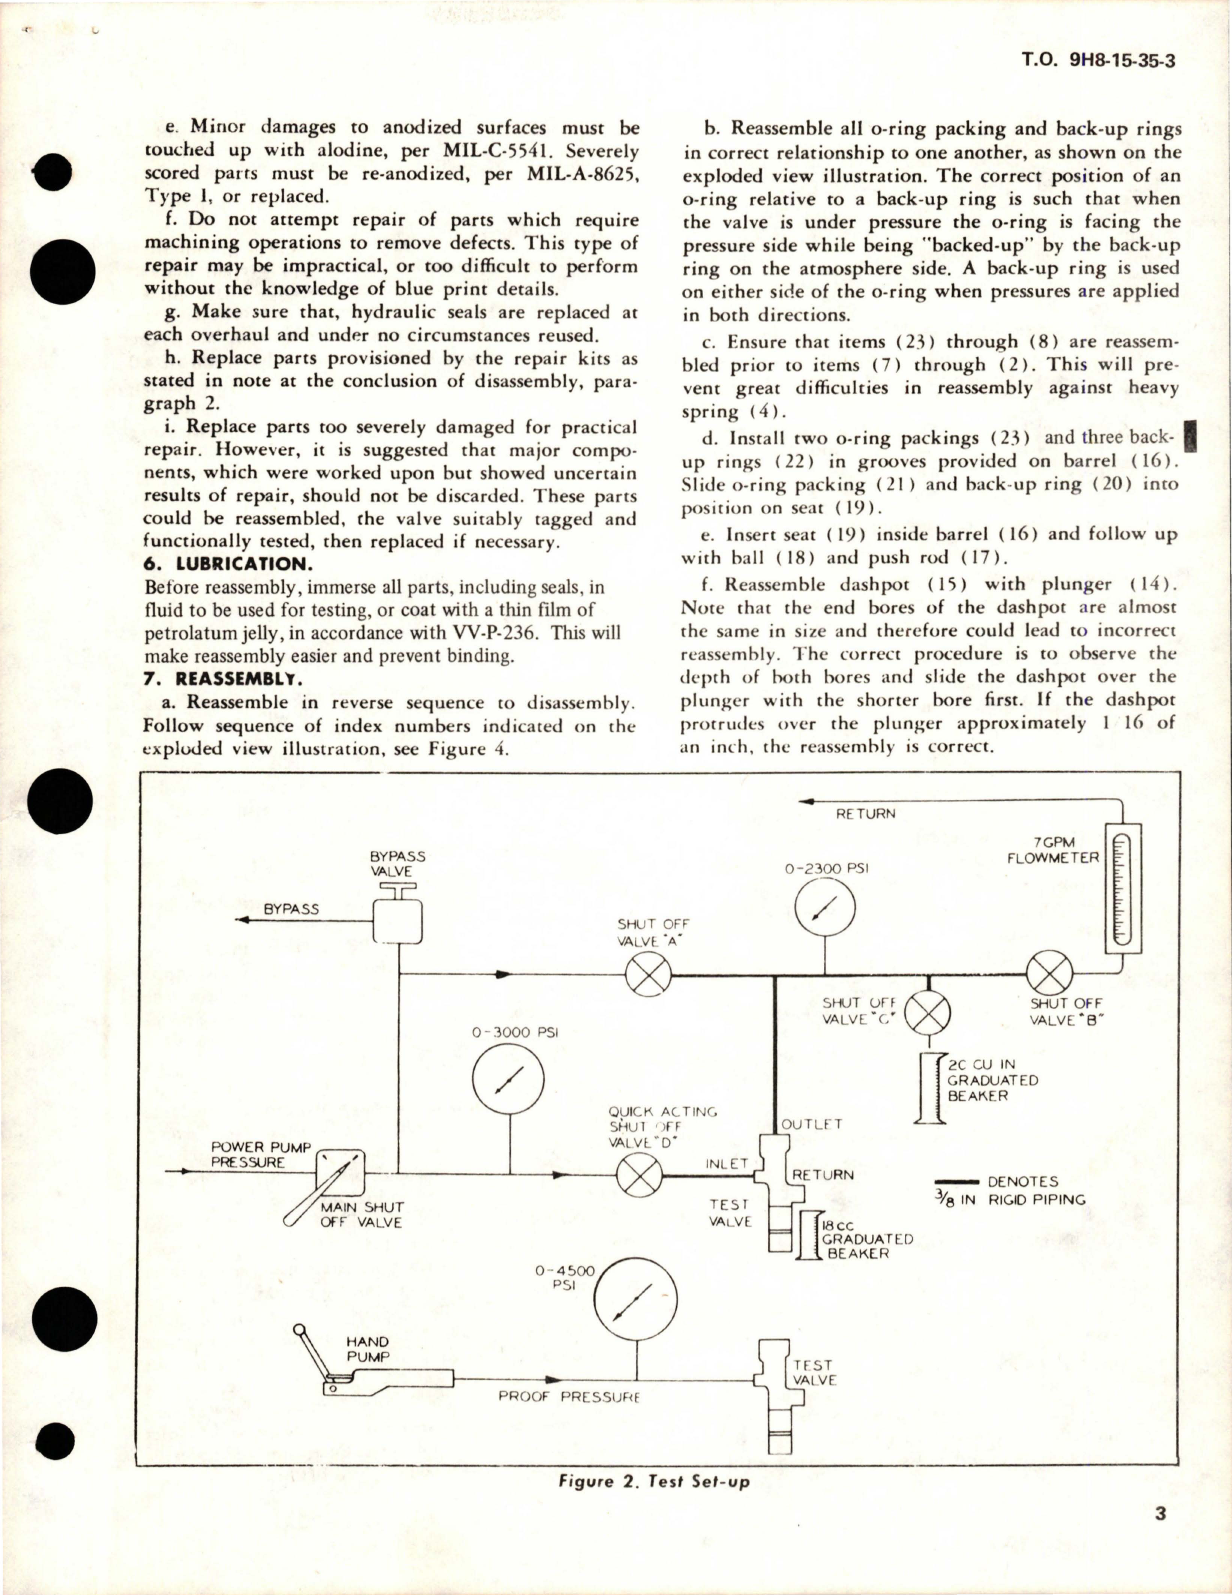 Sample page 5 from AirCorps Library document: Overhaul Instructions with Parts Breakdown for Hydraulic Pressure Reducer Valve - Parts 3A004 and 3A016